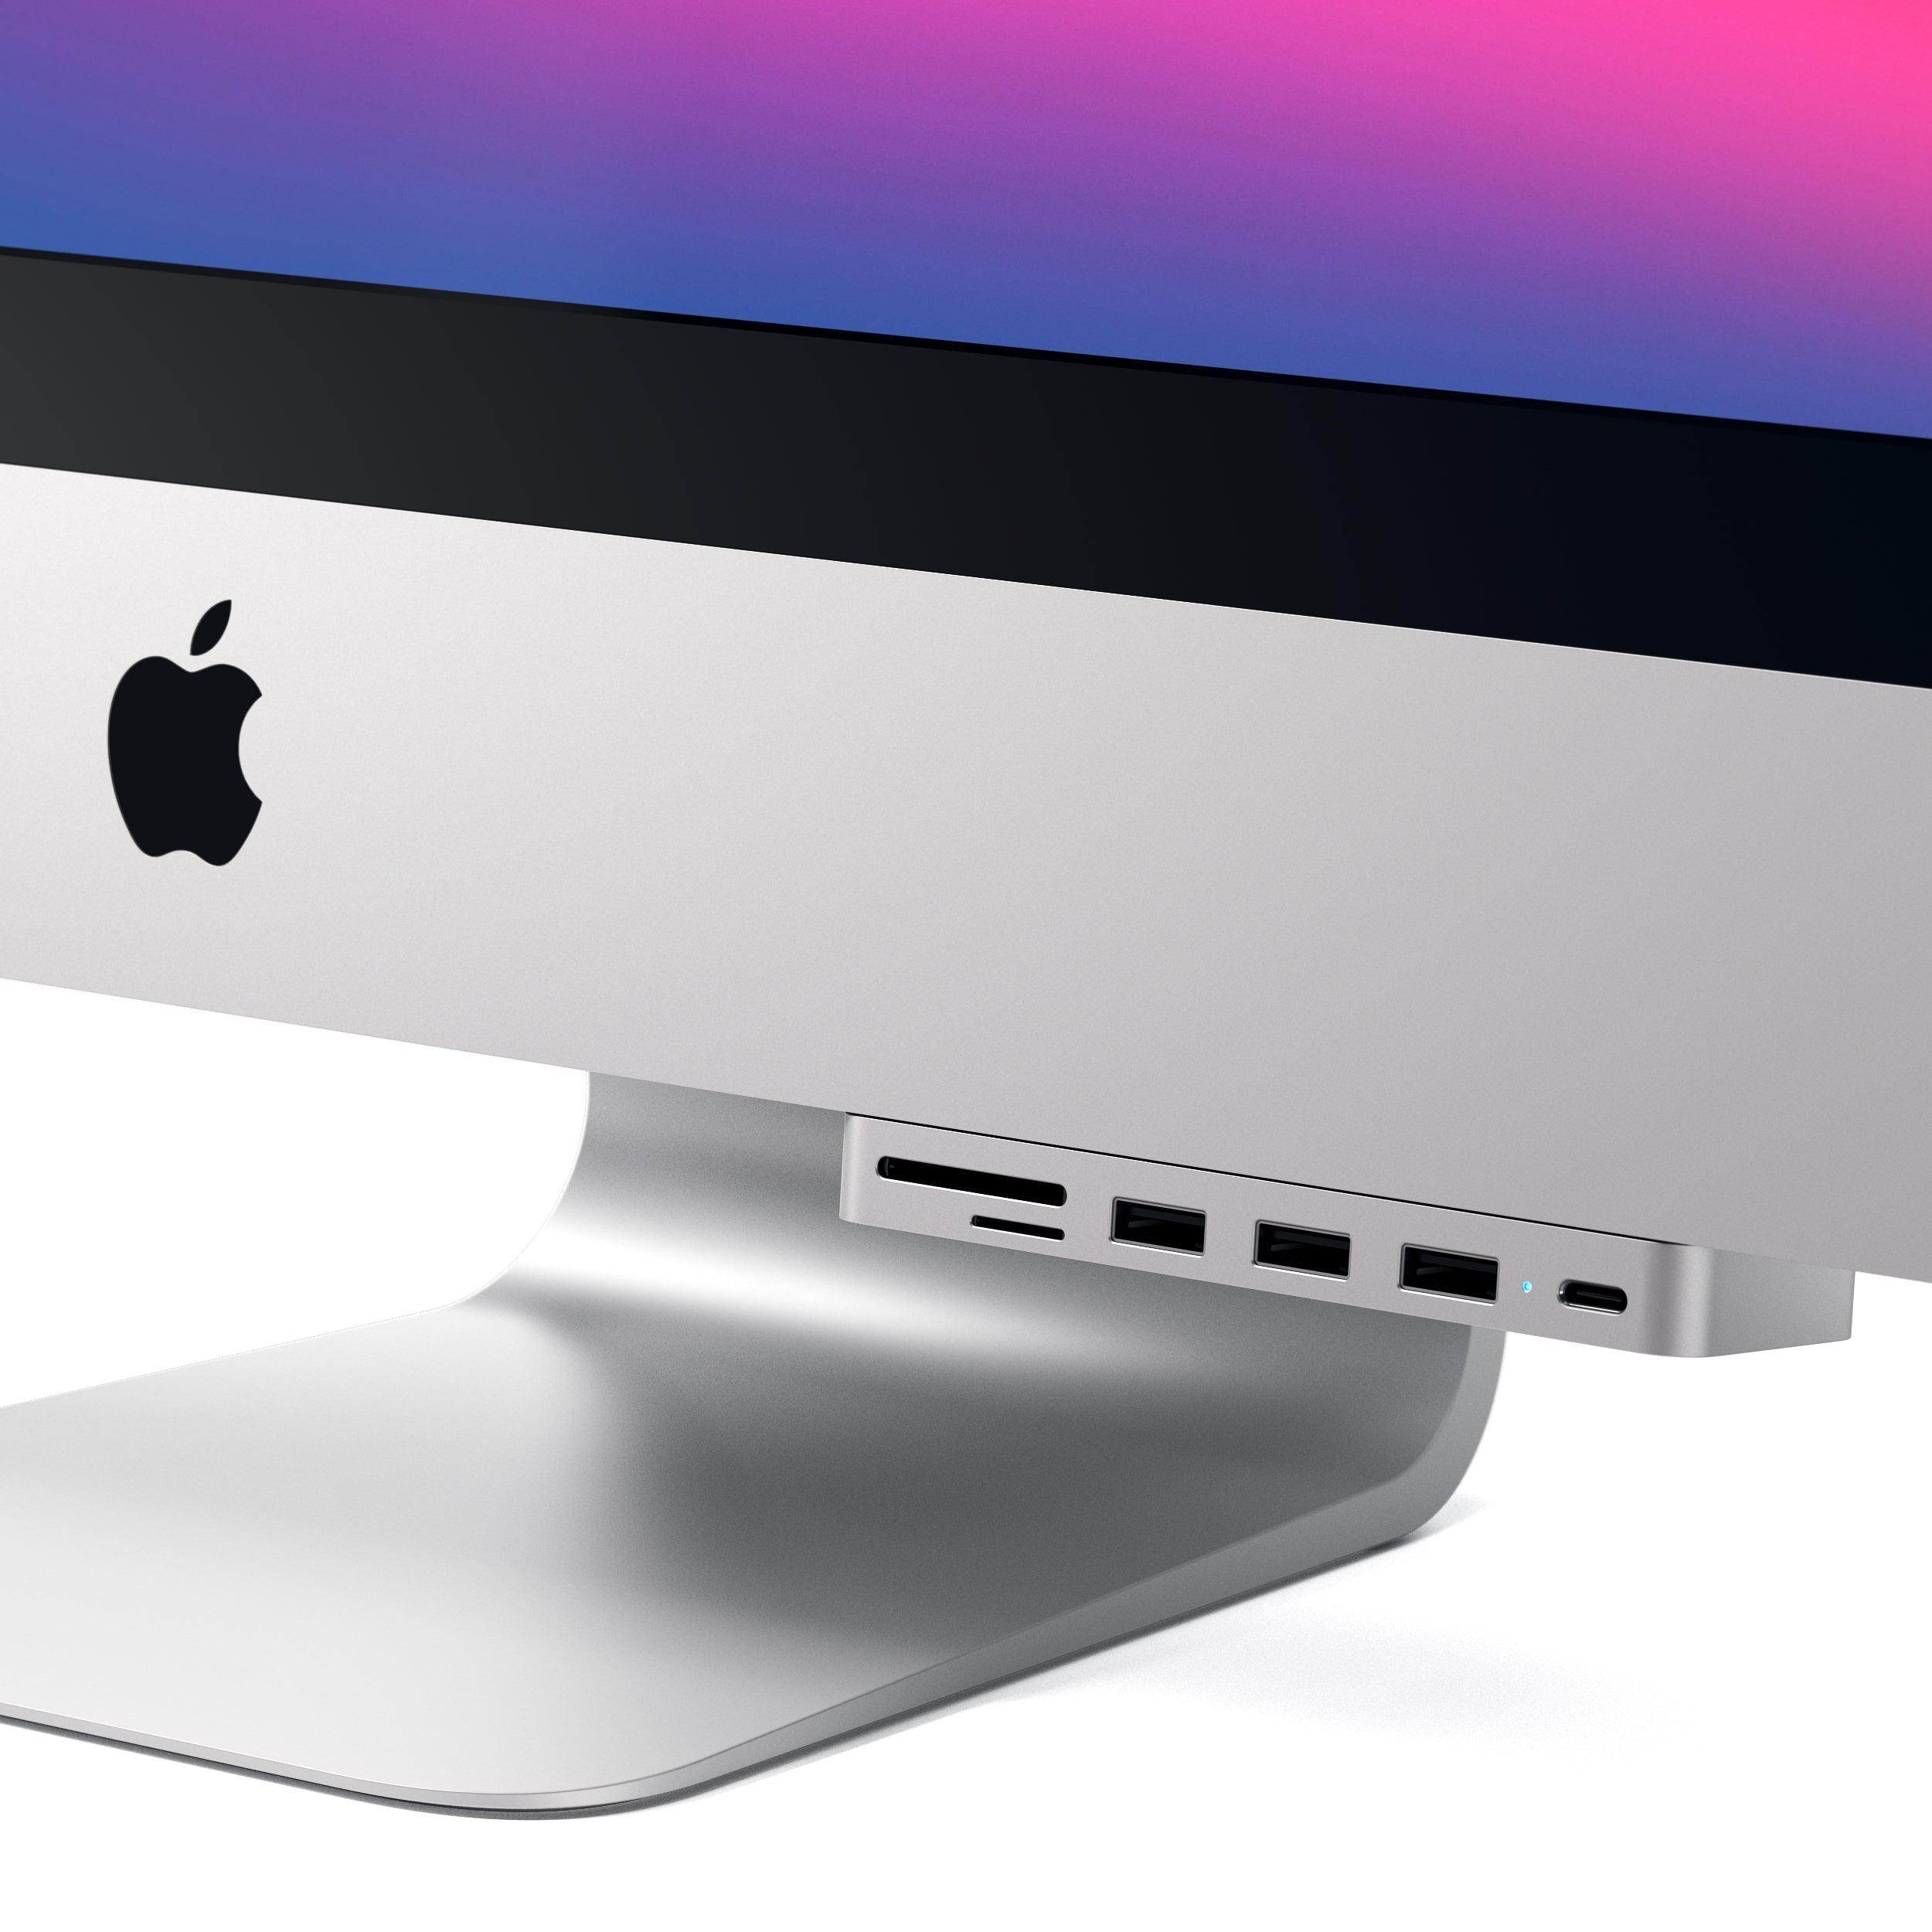 Satechi USB-C Clamp Hub Pro for iMac and iMac Pro Exclusively designed for the iMac and iMac Pro (2017 and later) the Satechi Clamp Hub Pro offers convenient access for all the most-loved ports and devices.This Satechi hub adds functionality to your deskt